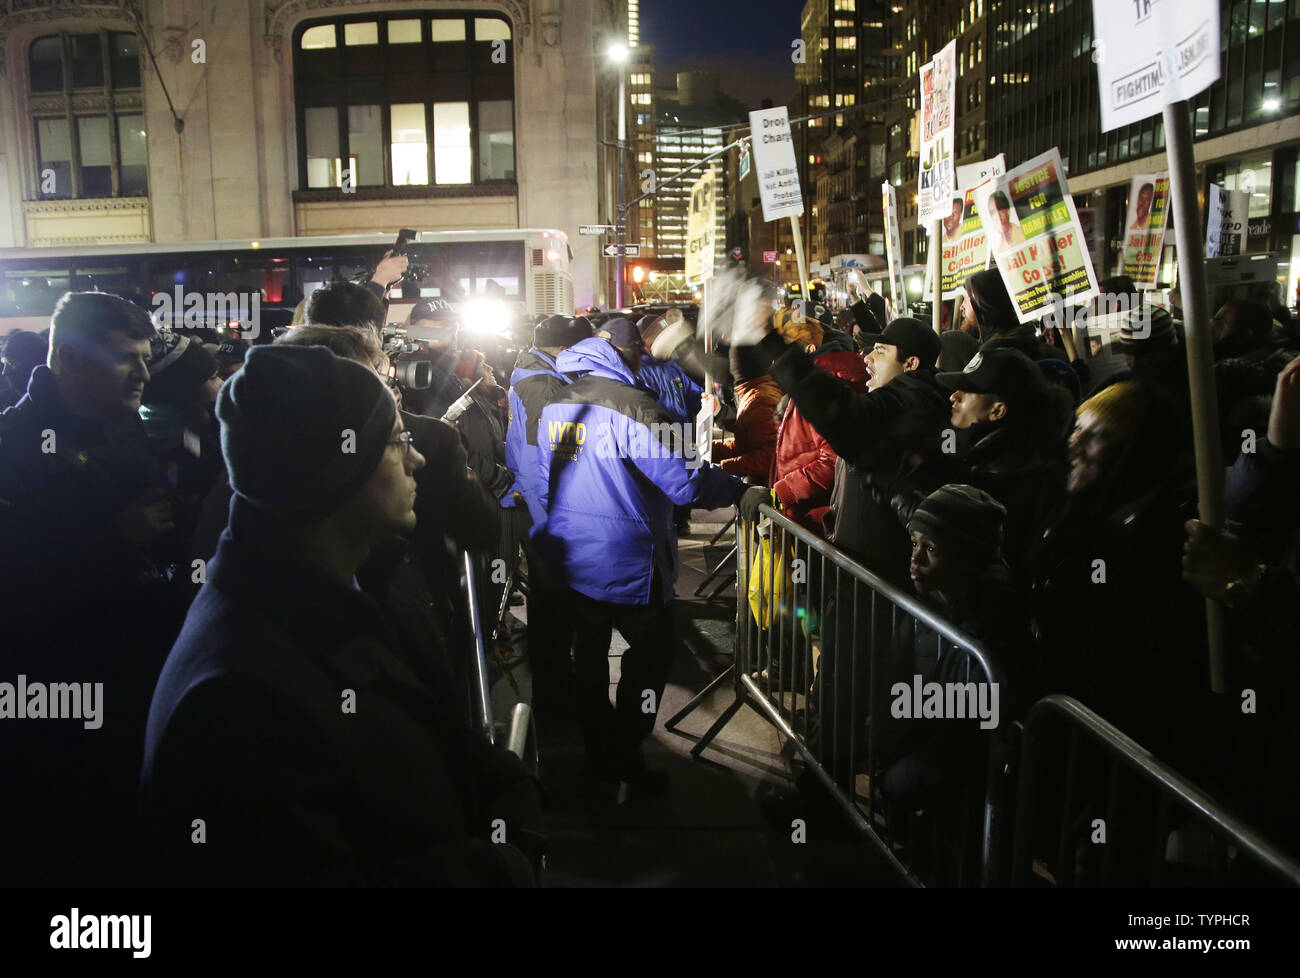 Two separate protests, both for and against police, are kept separate by the NYPD outside of City Hall in lower Manhattan over 2 weeks after a decision by a grand jury not to indict an NYPD officer involved in the apparent chokehold death of Eric Garner in New York City on December 19, 2014. Demonstrators gathered at City Hall in support of the NYPD Friday evening, but they were met right away with a rival demonstration by critics of police policies. Garner, a 43 year old father of six, died in July after police officers attempted to arrest him for allegedly selling loose, untaxed cigarettes i Stock Photo